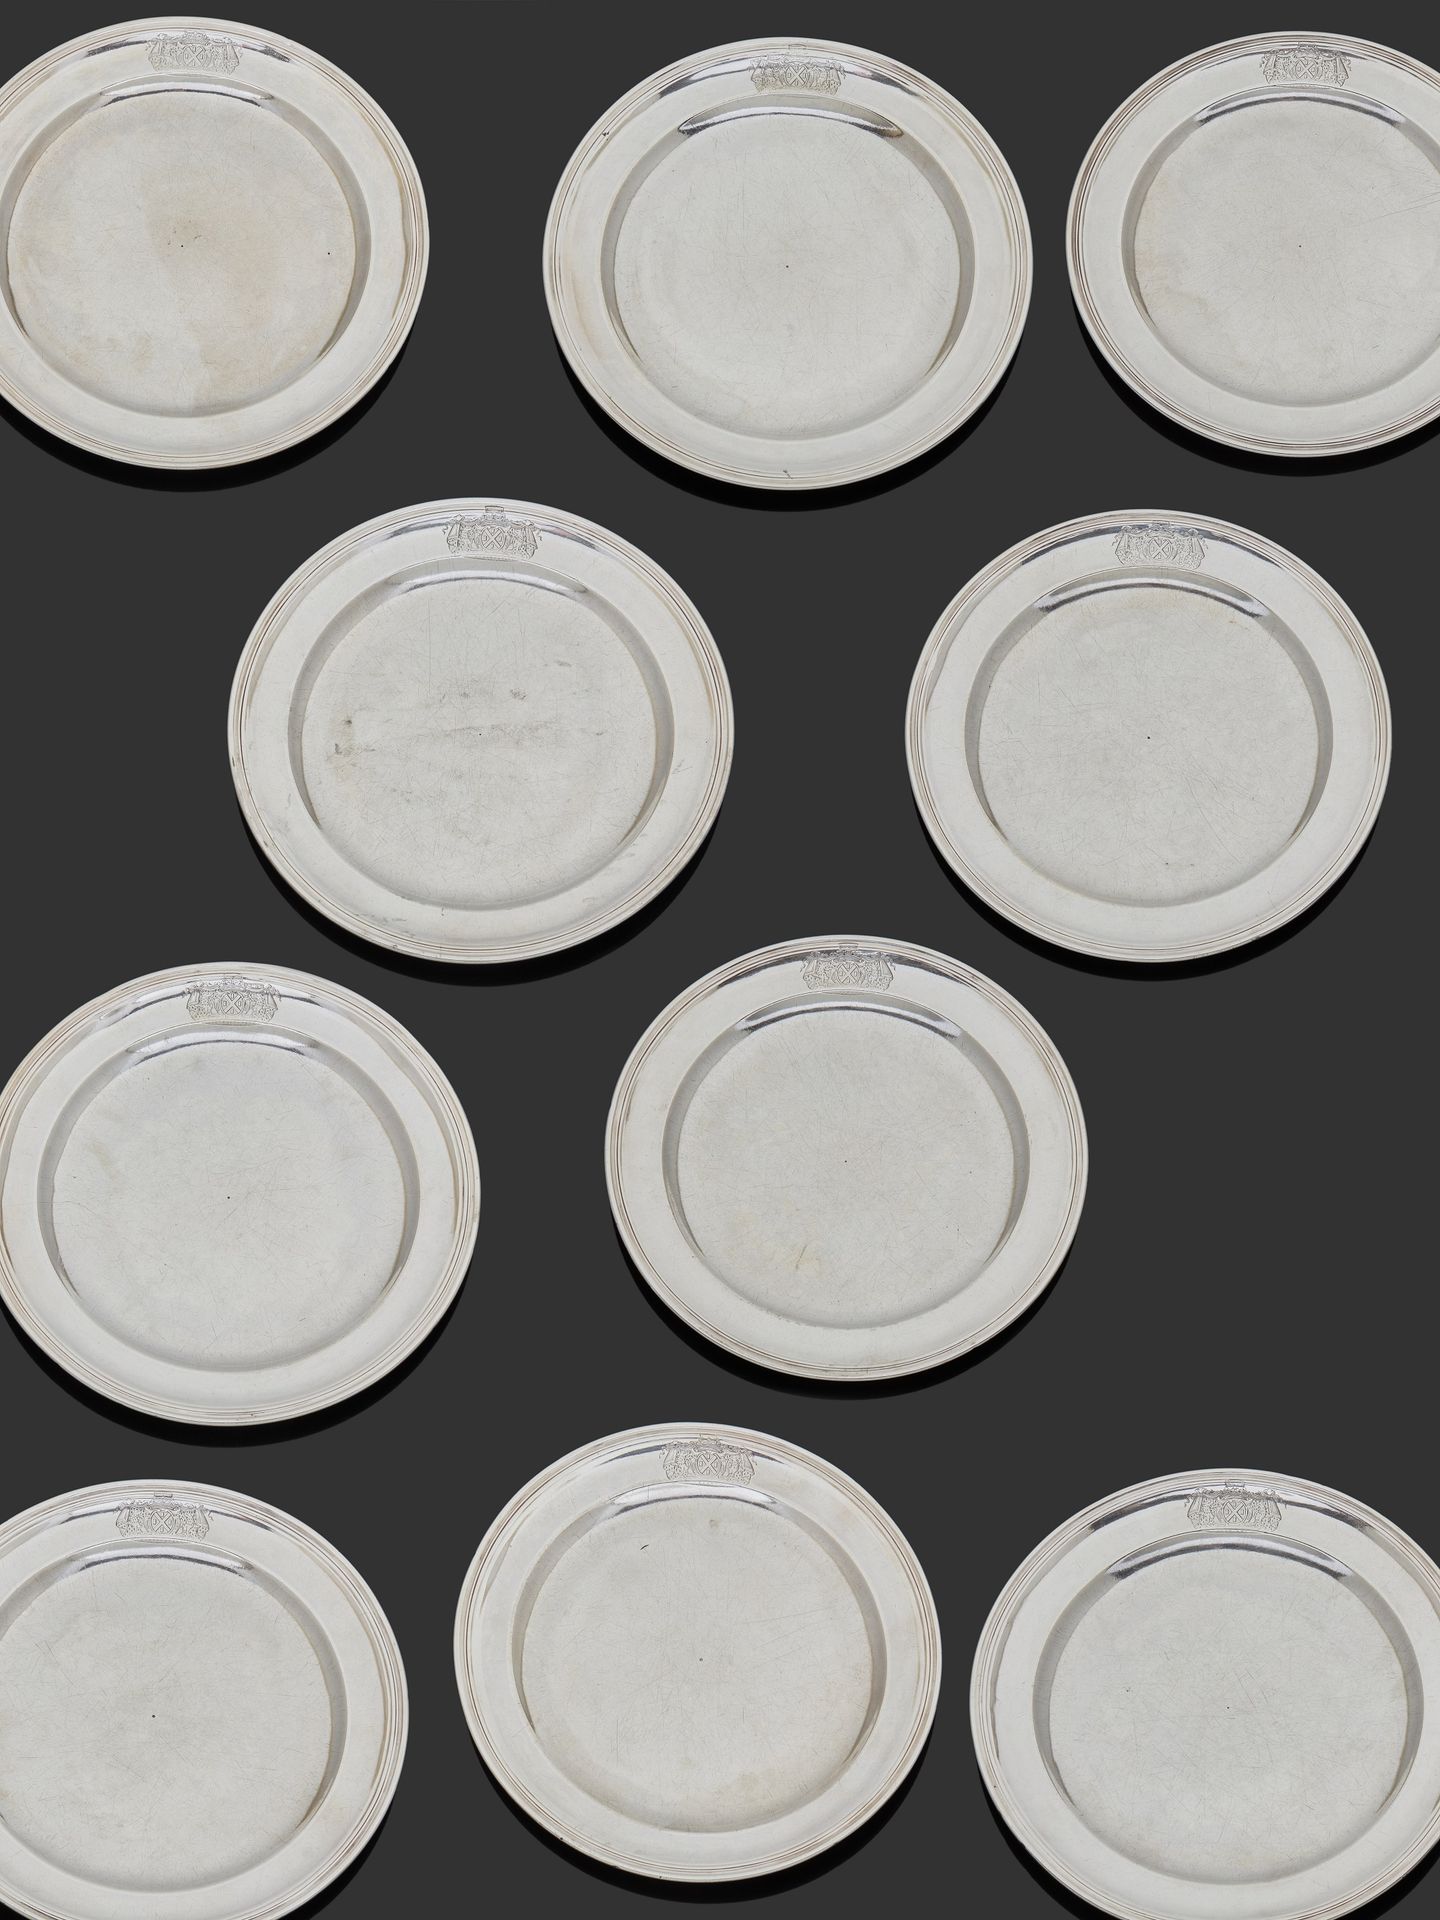 Null RENNES 1728 - 1730
Suite of ten silver plates of circular form moulded with&hellip;